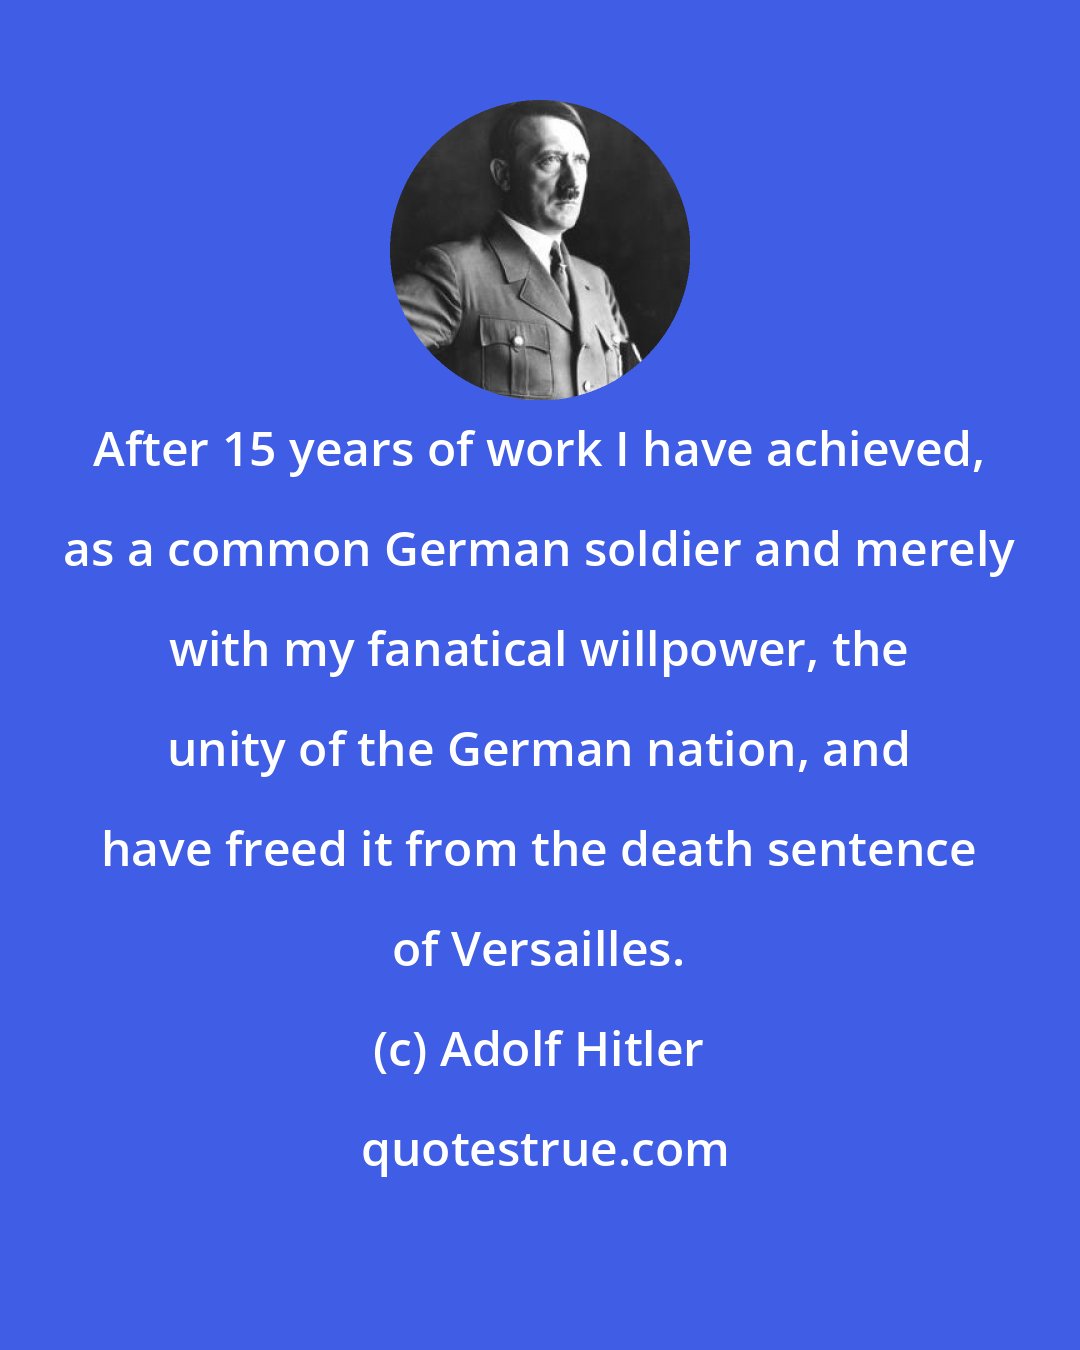 Adolf Hitler: After 15 years of work I have achieved, as a common German soldier and merely with my fanatical willpower, the unity of the German nation, and have freed it from the death sentence of Versailles.